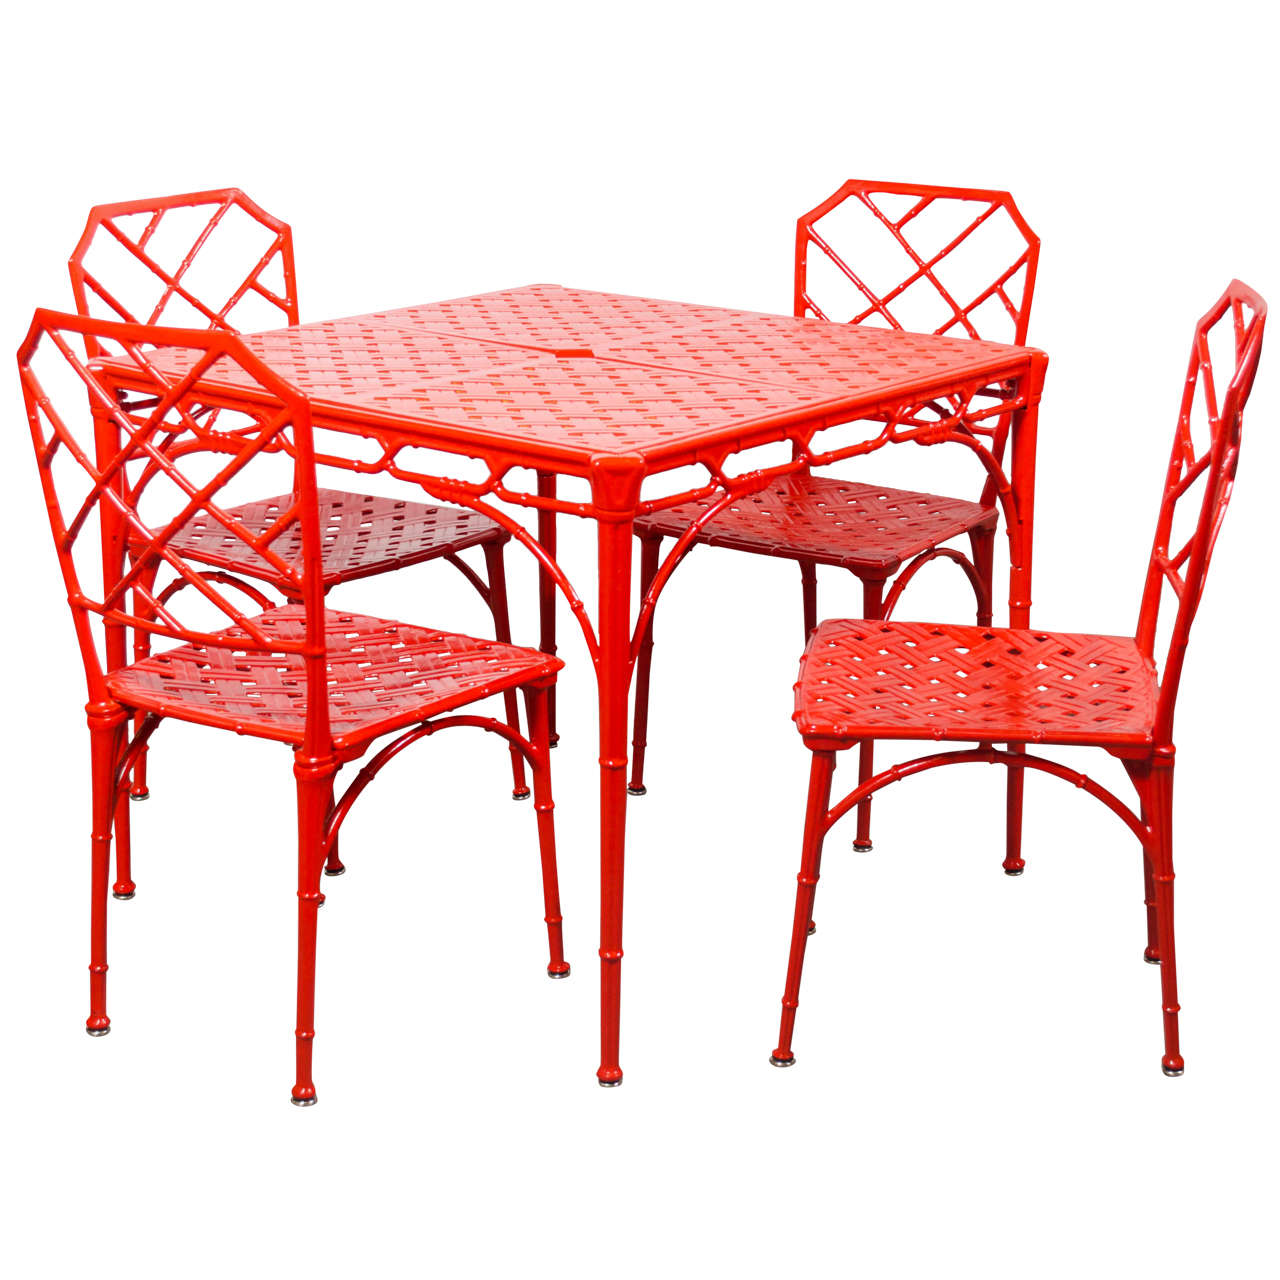 Hollywood Regency Style Faux Bamboo Dining or Patio Set In Vermillion